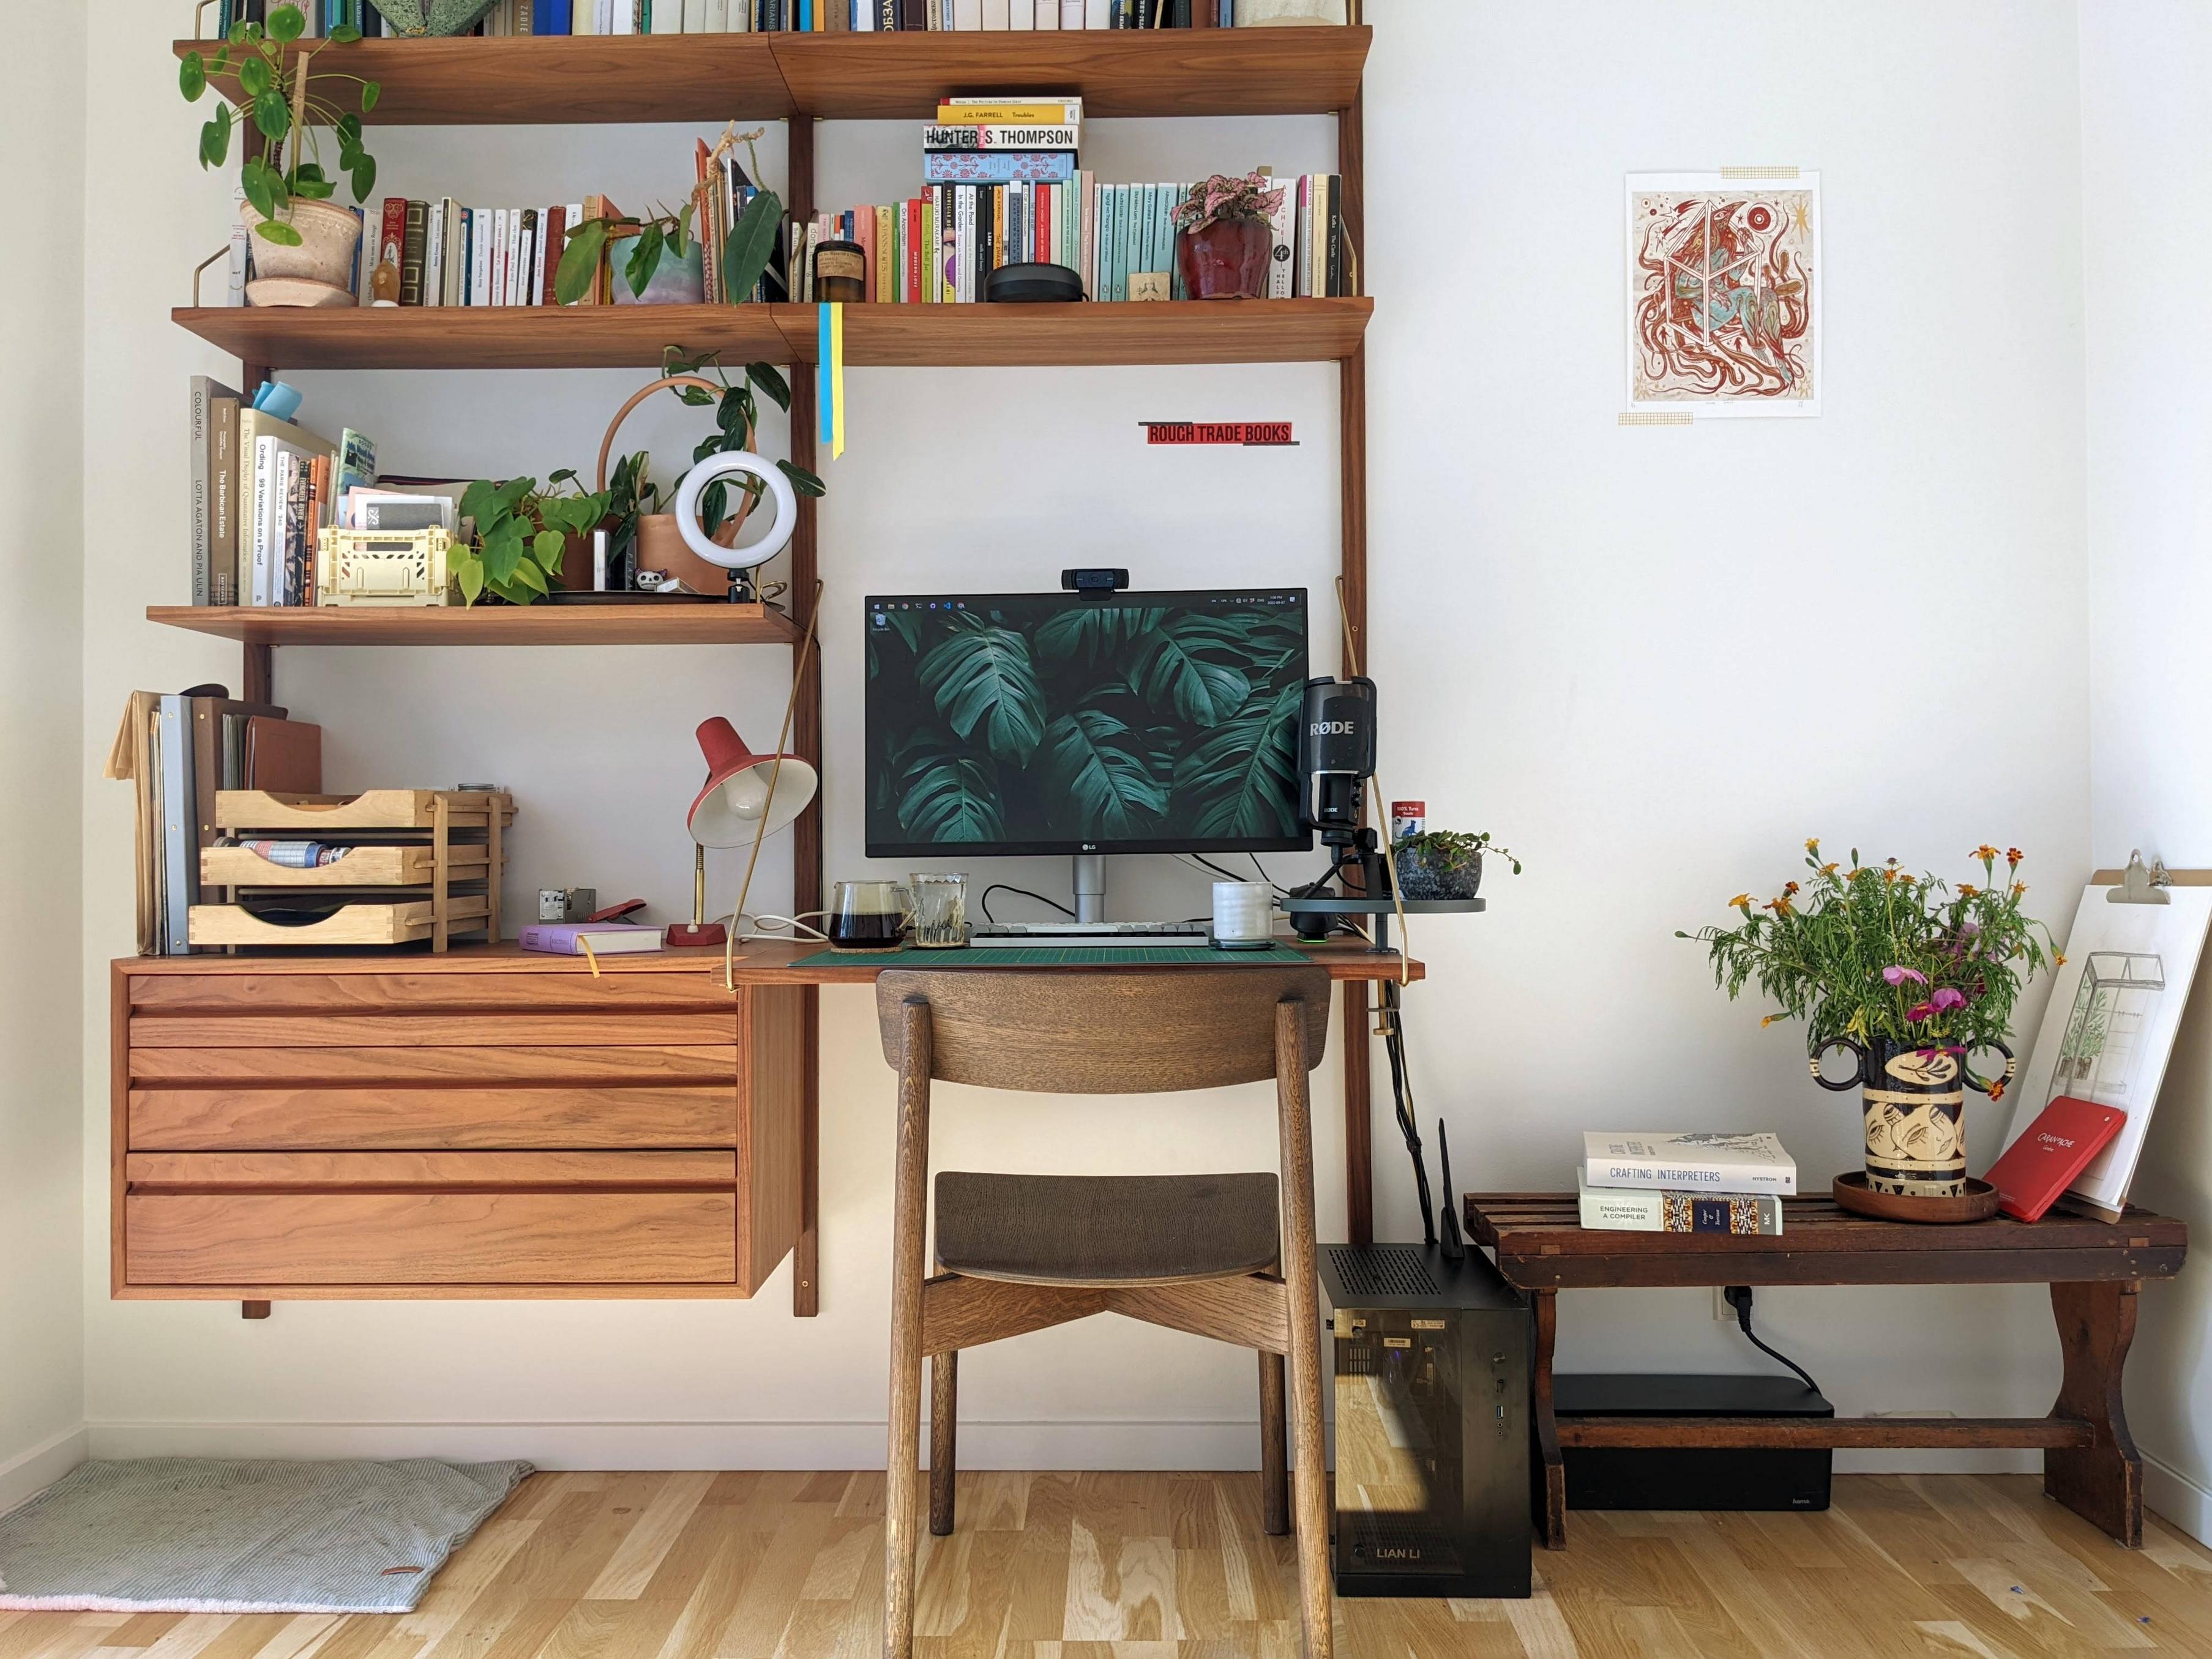 The photo depicts a walnut bookshelf system against a white wall. Part of this system is a desk with a large monitor showing a backdrop of vivid monstera leaves. The shelf is full of various colourful books, nicknacks, and plants. Right of the book shelf standing on the floor is a small black box, a self-built computer. Next to is a vintage-looking bench with several more books, and black vase with flowers. There is a bit of sunshine coming in from the left of the photo, giving this space a welcoming and warm vibe.